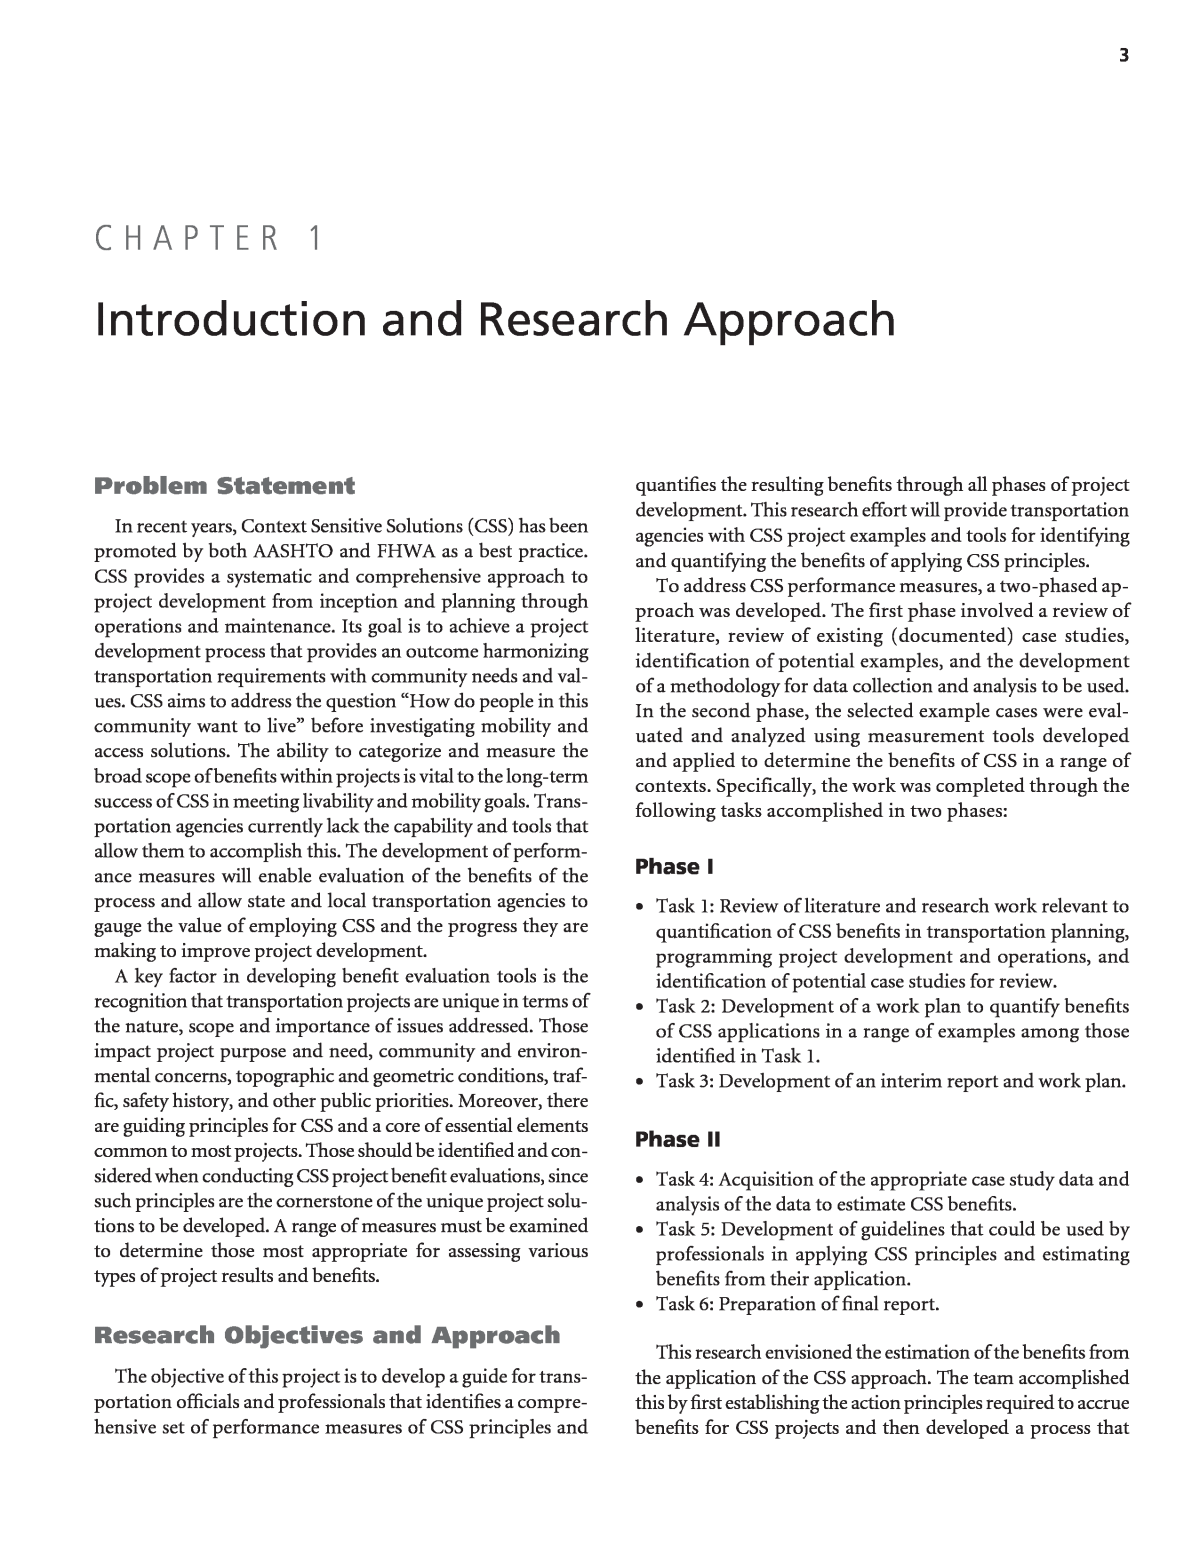 how to make introduction in research chapter 1